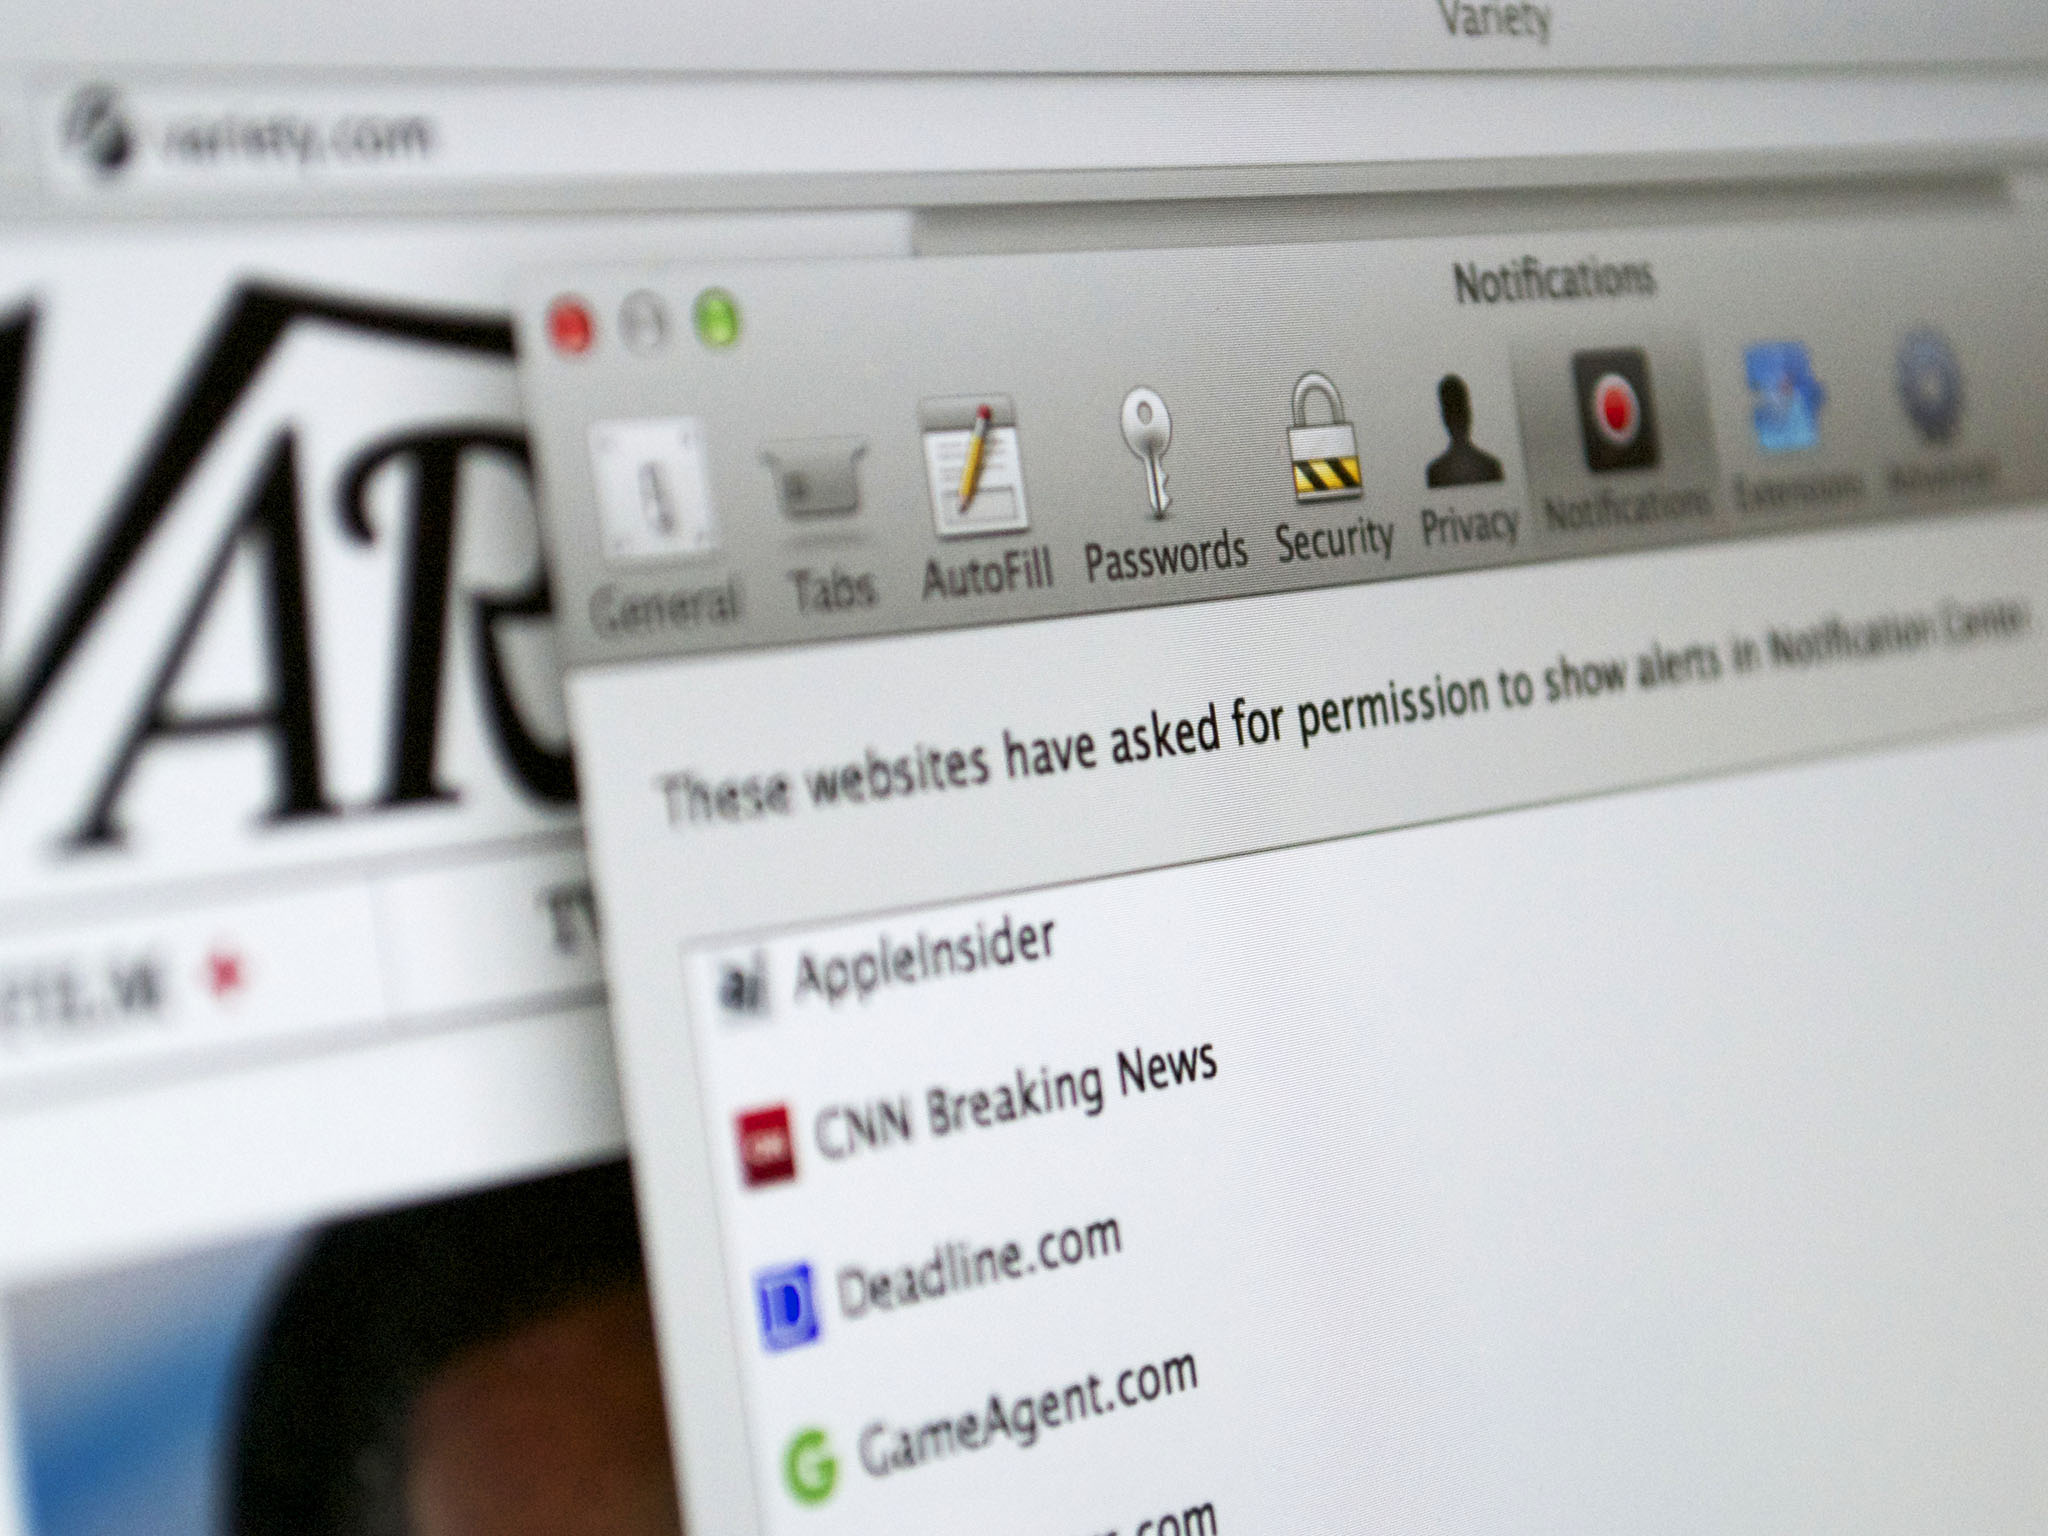 How to manage web notifications with Mac Safari